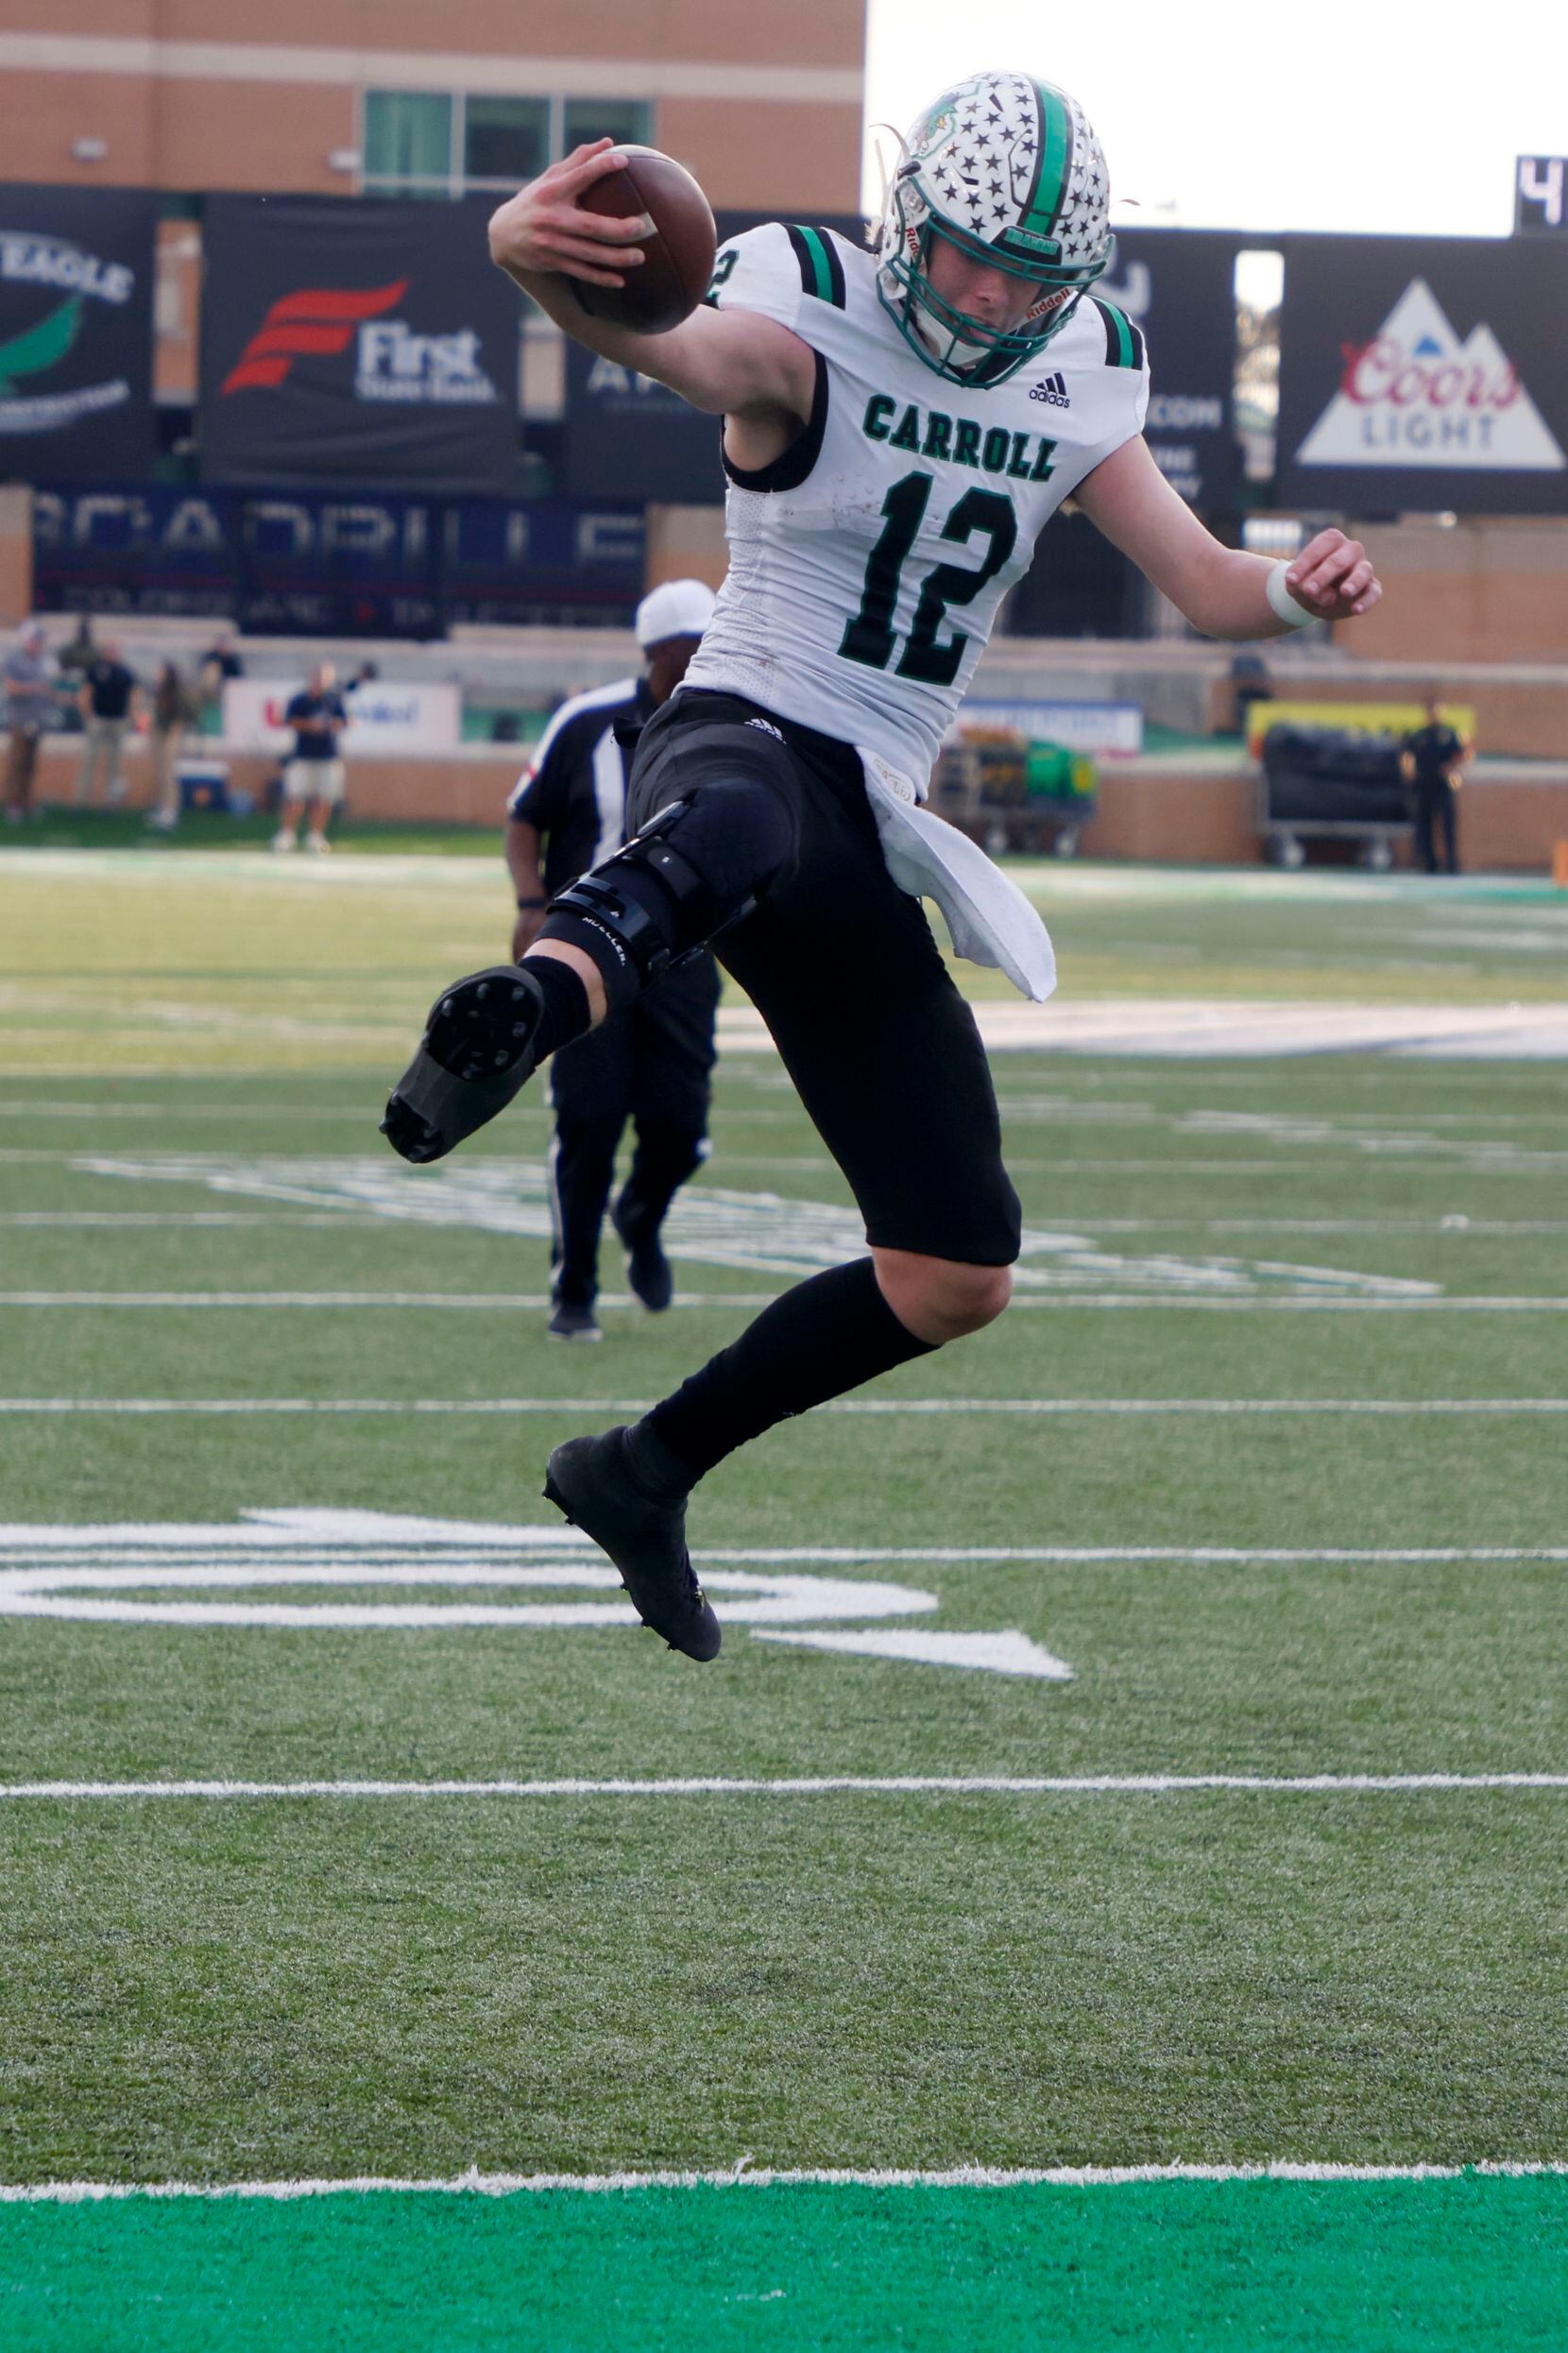 Southlake Carroll quarterback Kaden Anderson (12) leaps into the end zone for a touchdown against Allen during the second half of a Class 6A Division I Region I final high school football game in Denton, Texas on Saturday, Dec. 4, 2021. Southlake defeated Allen 47-21. (Michael Ainsworth/Special Contributor)